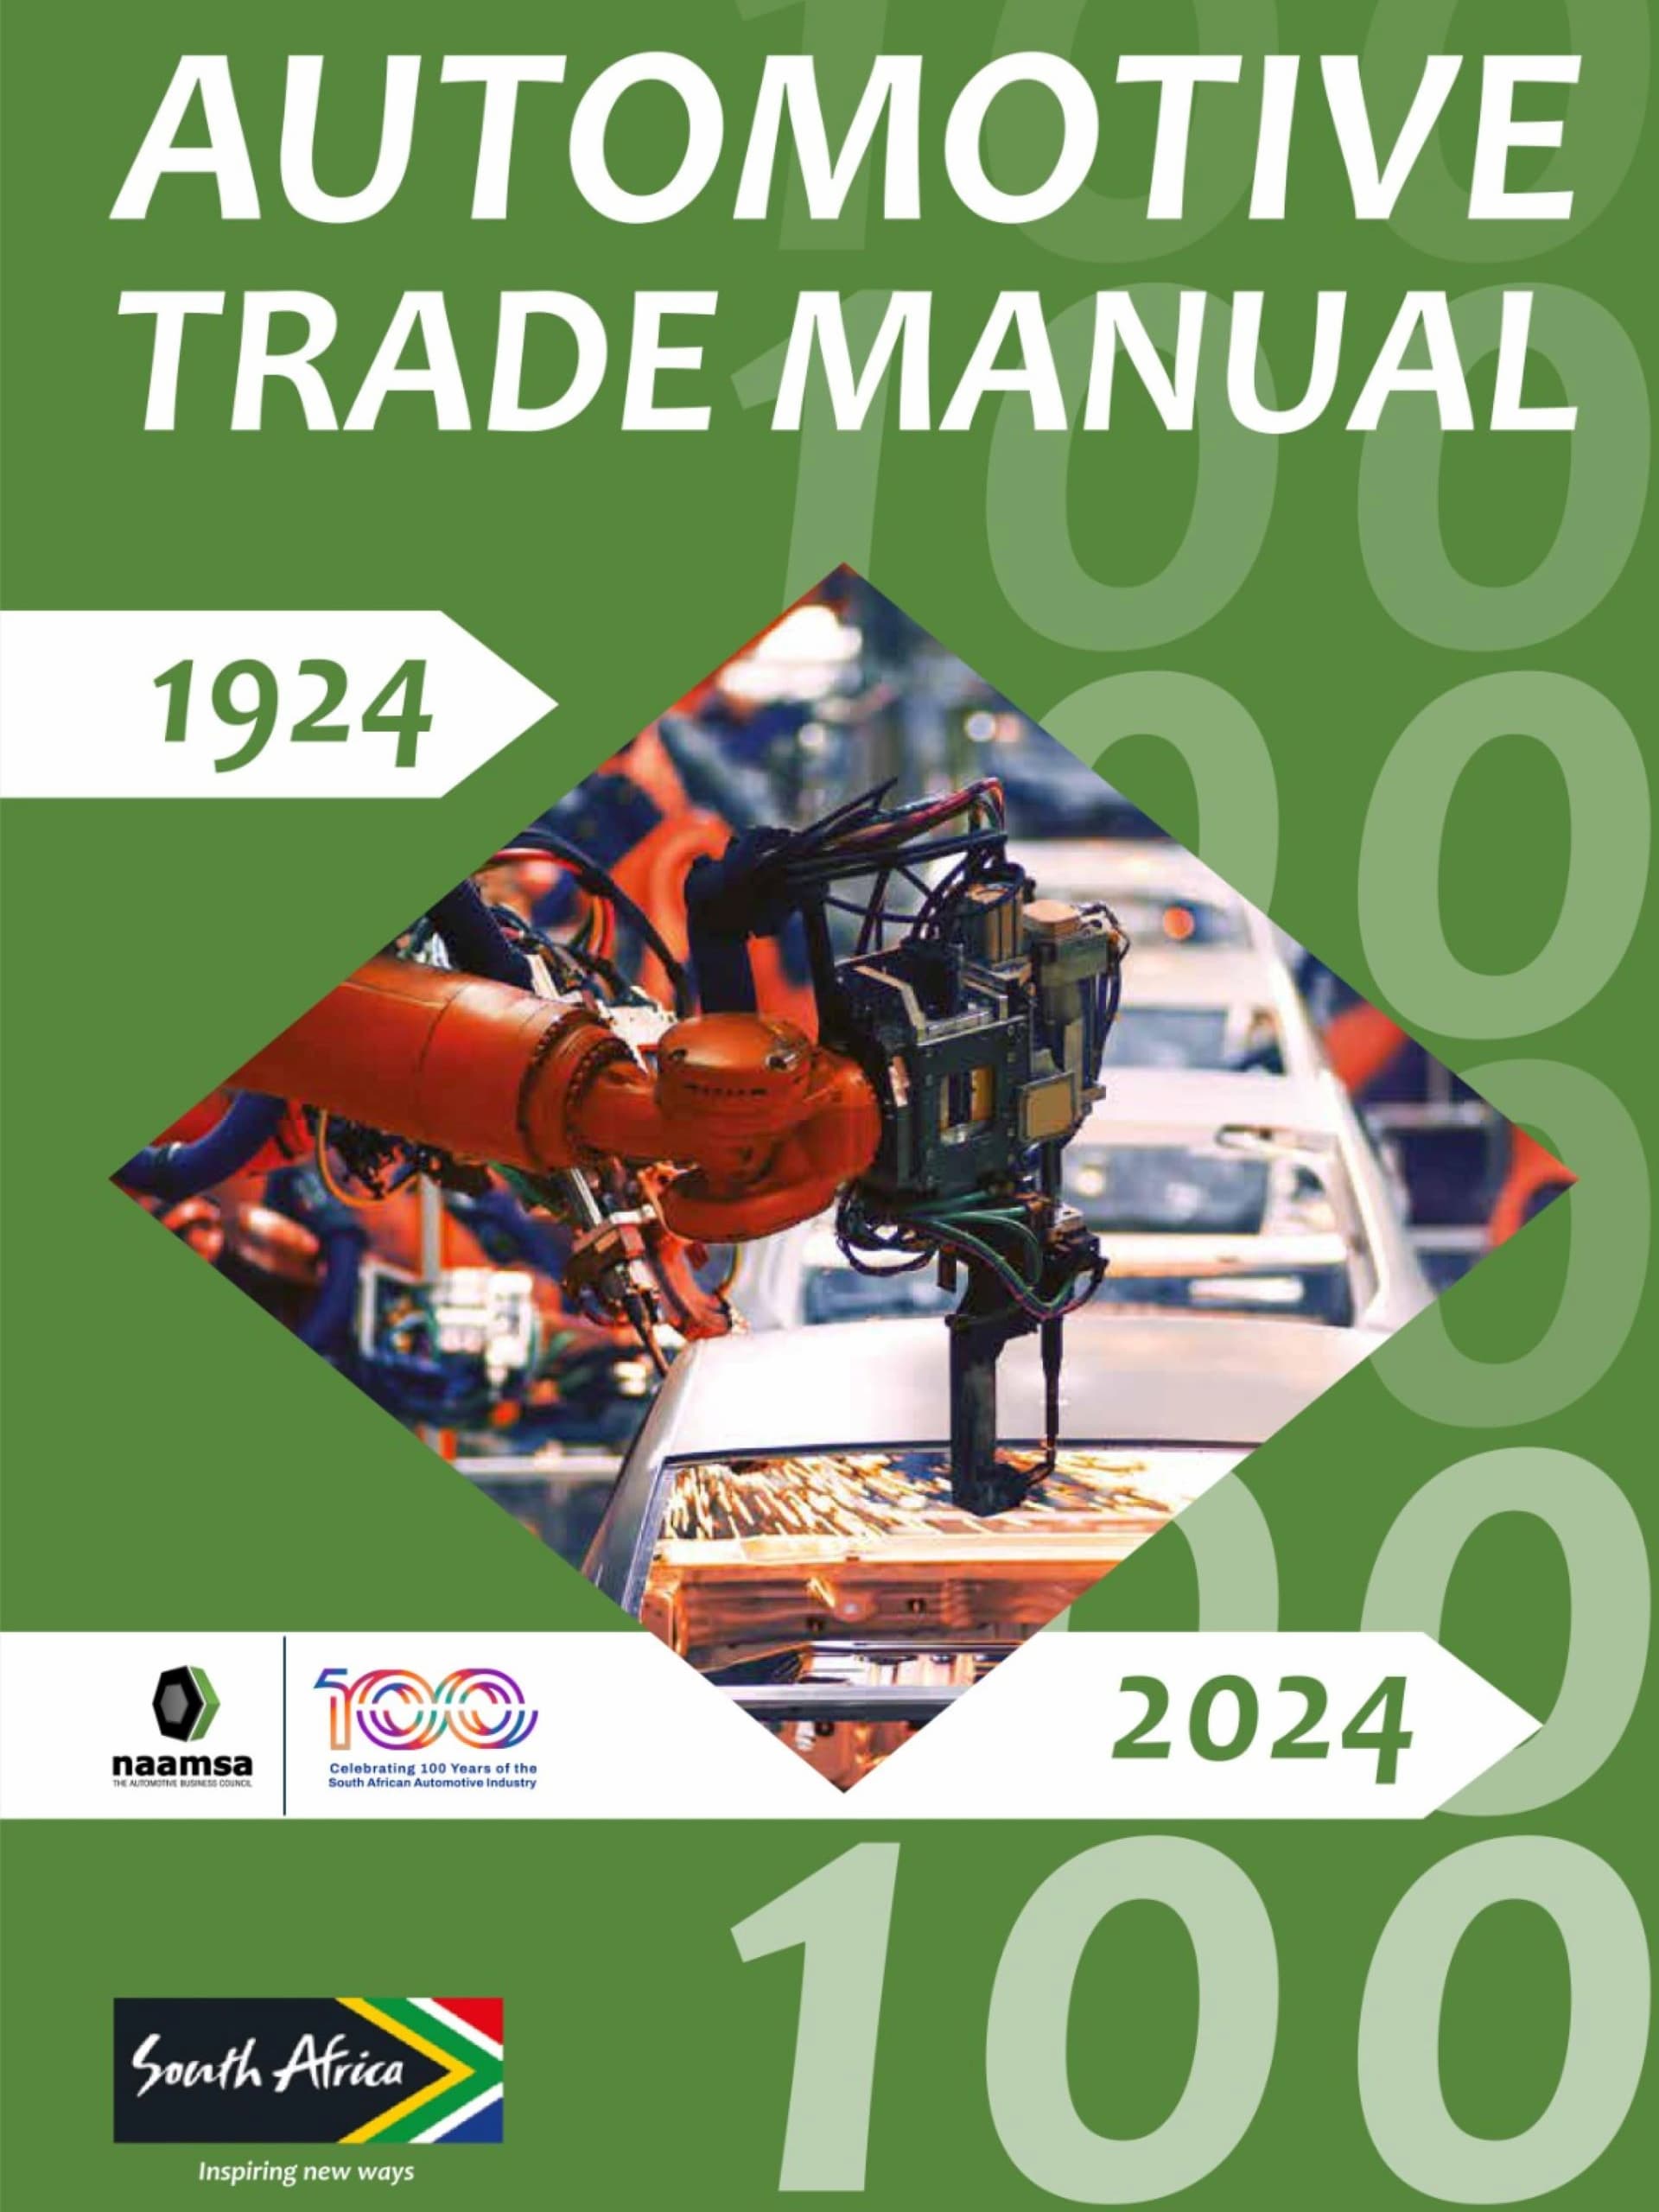 Release of new Automotive Trade Manual coincides with SA auto centenary